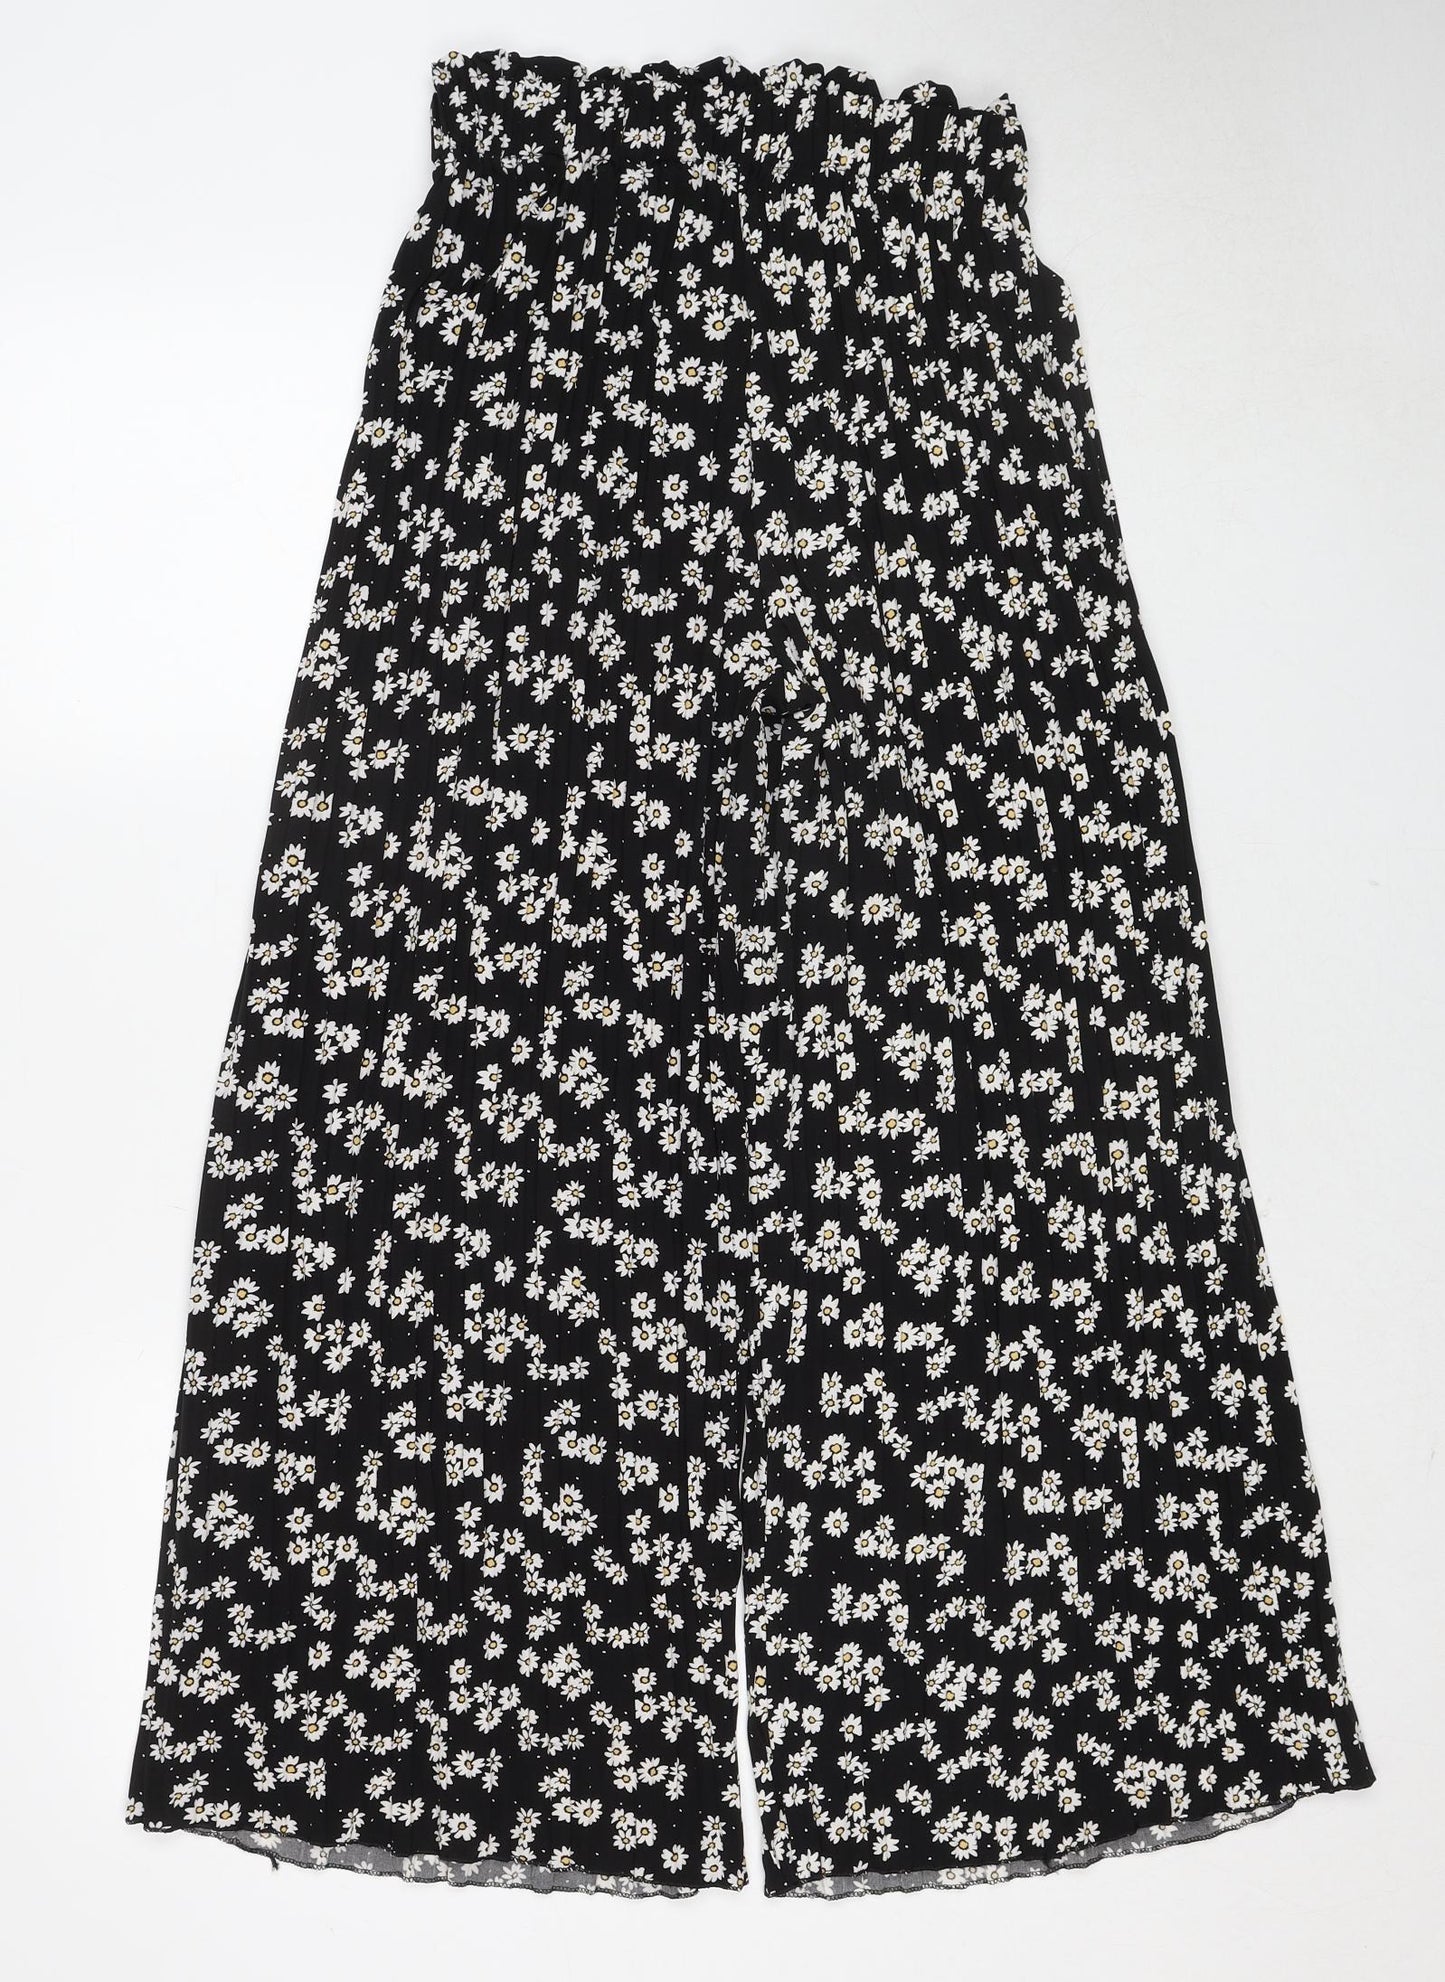 Blue Vanilla Womens Black Floral Polyester Trousers Size S Regular Drawstring